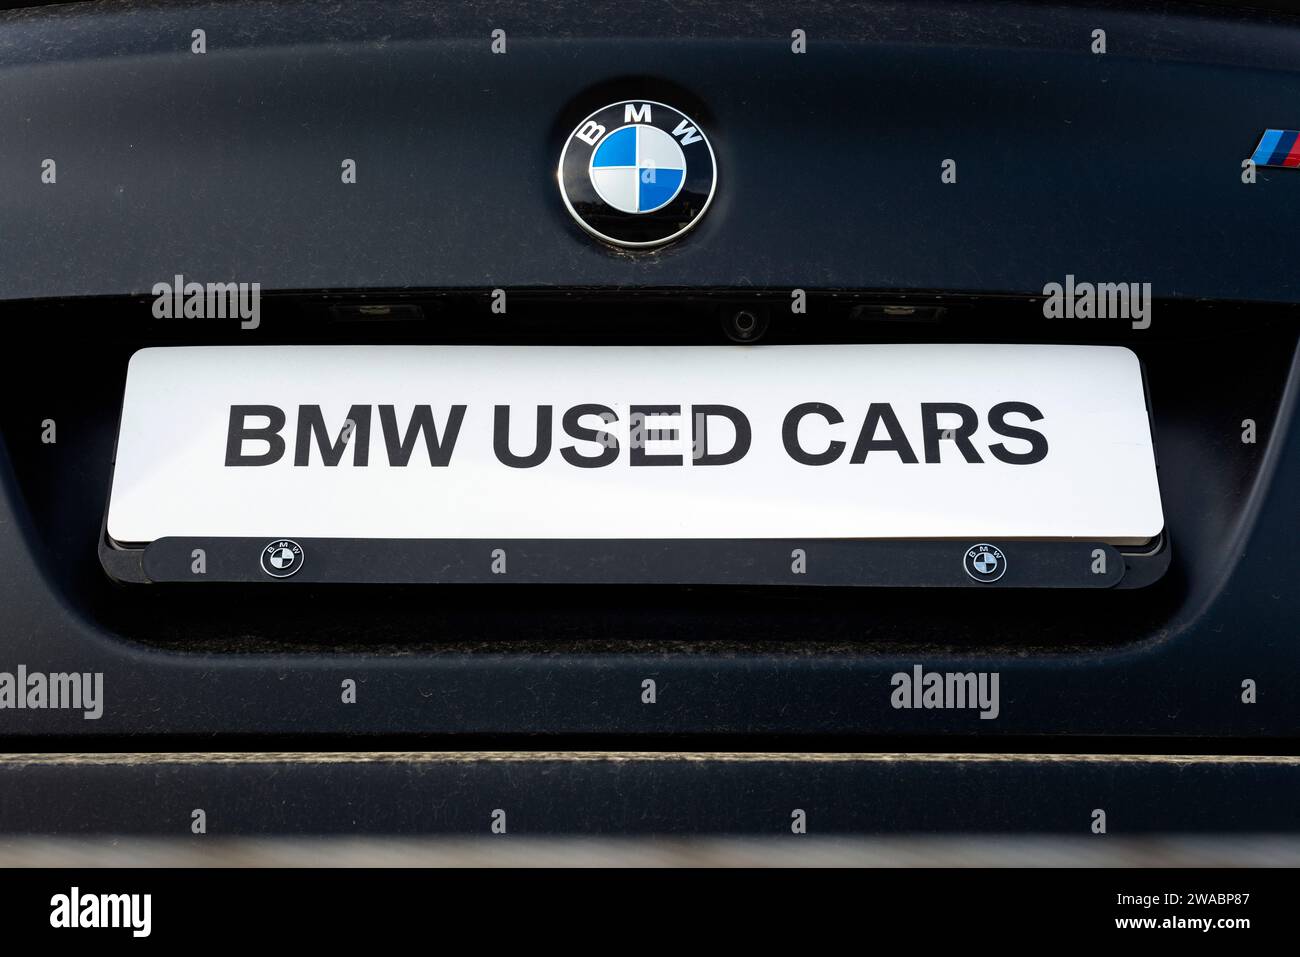 BMW logo on the back of an unidentified BMW Used Cars number plate Stock Photo